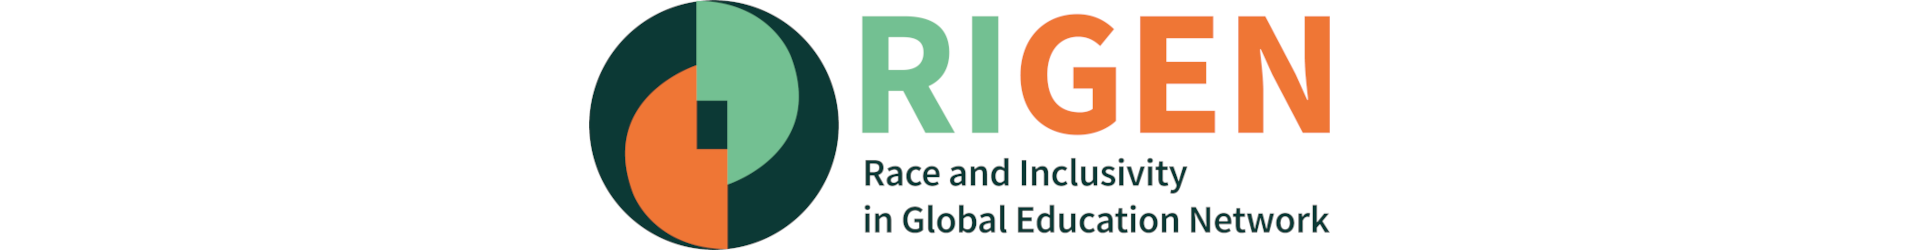 Reflections on the Building Racial Literacy (BRL) Programme